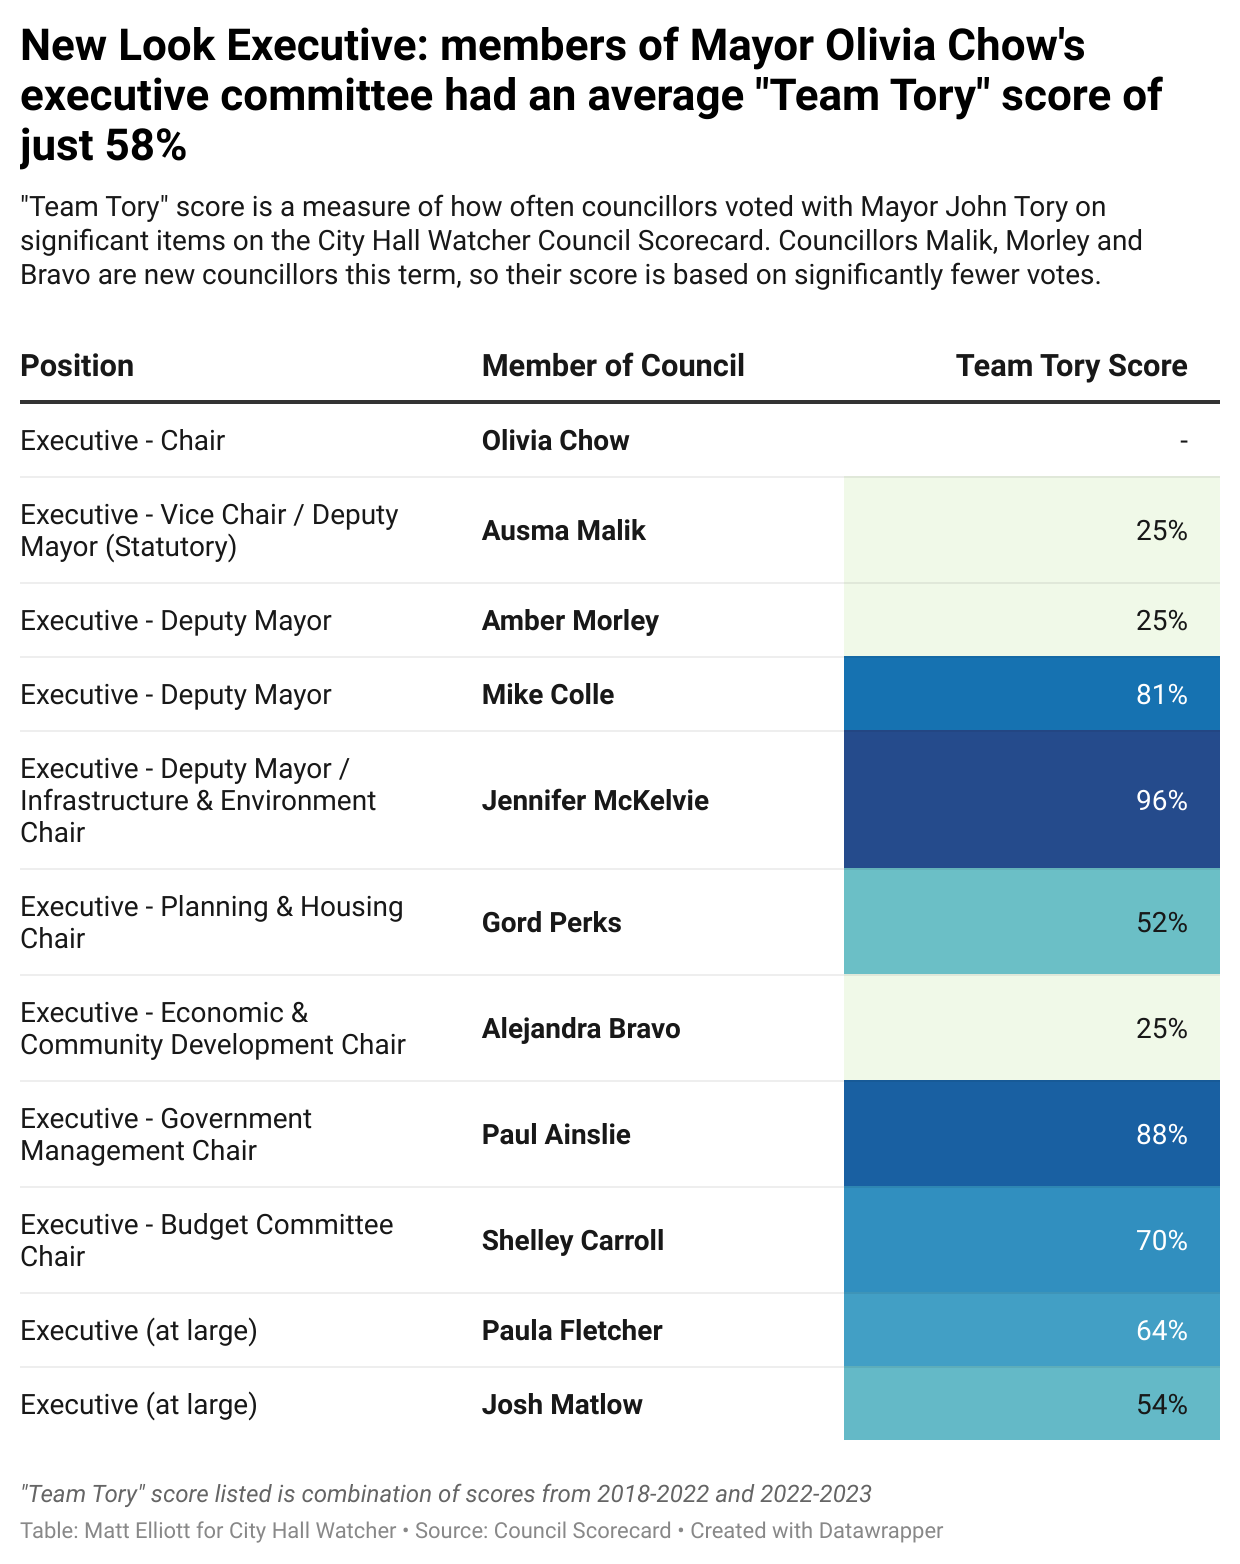 A data table, text version linked in caption, showing Team Tory Score of all members of Chow's new Executive Committee